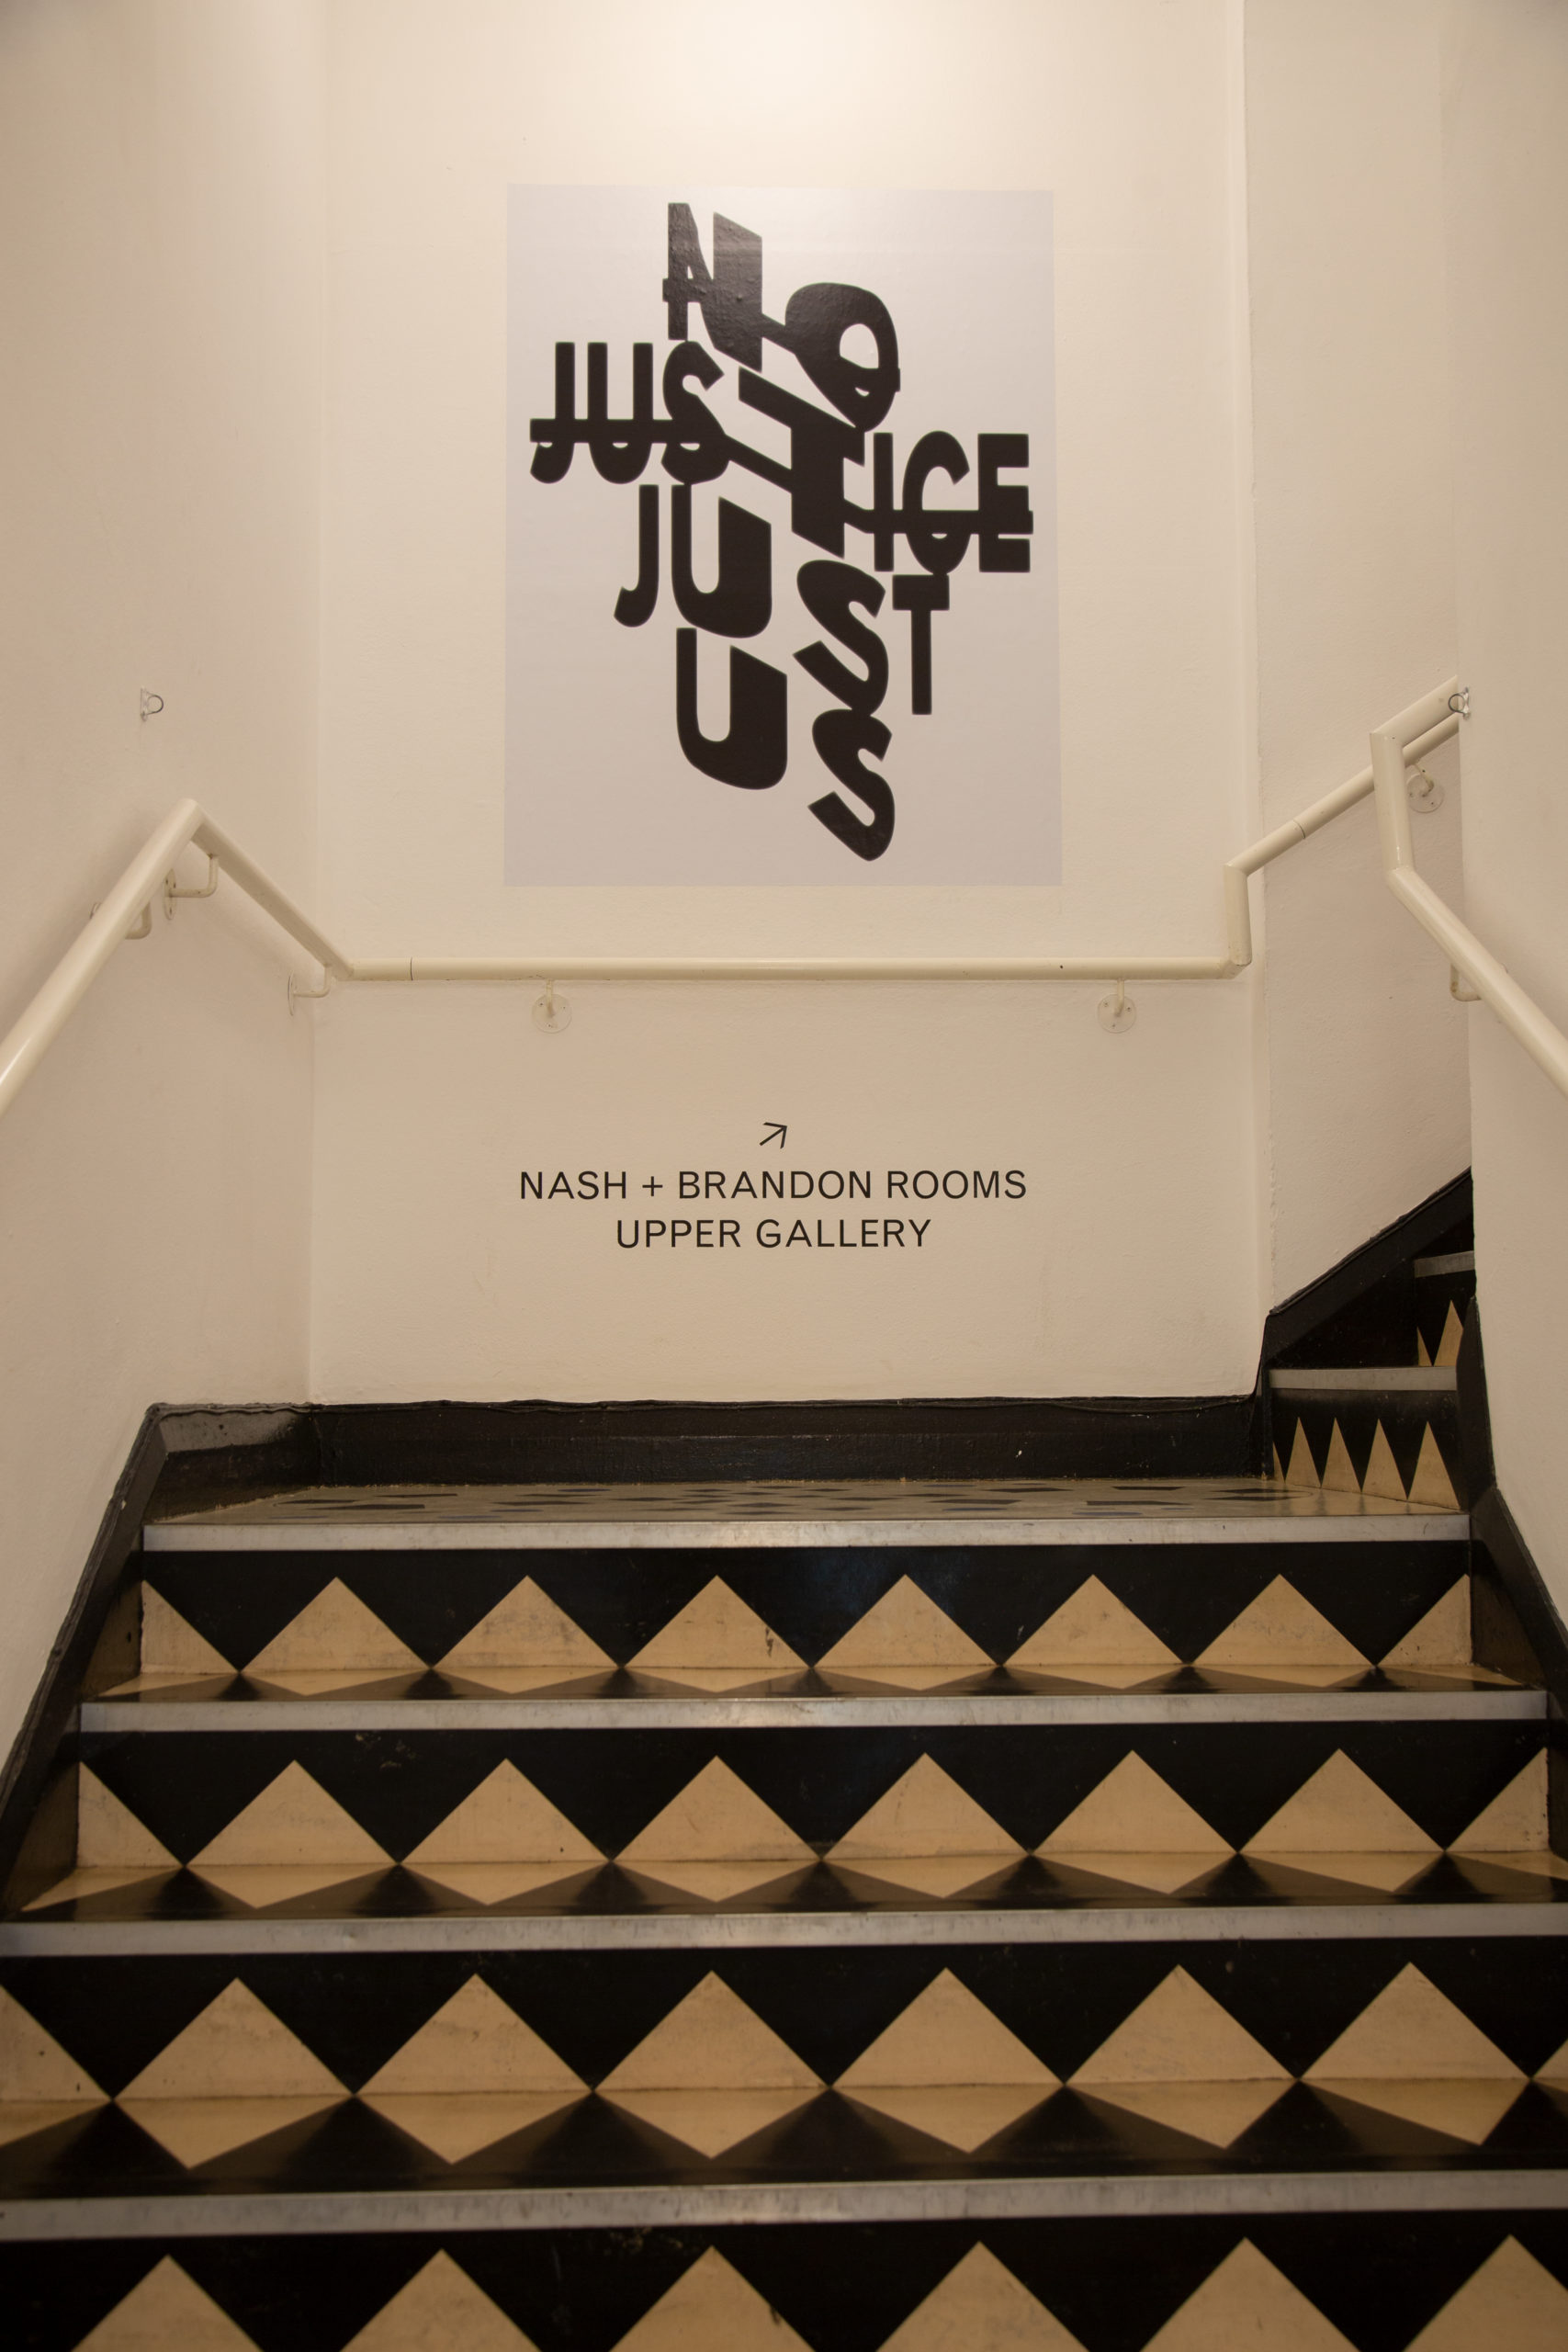 A set of stairs, and at the top a wall with a white poster reading 